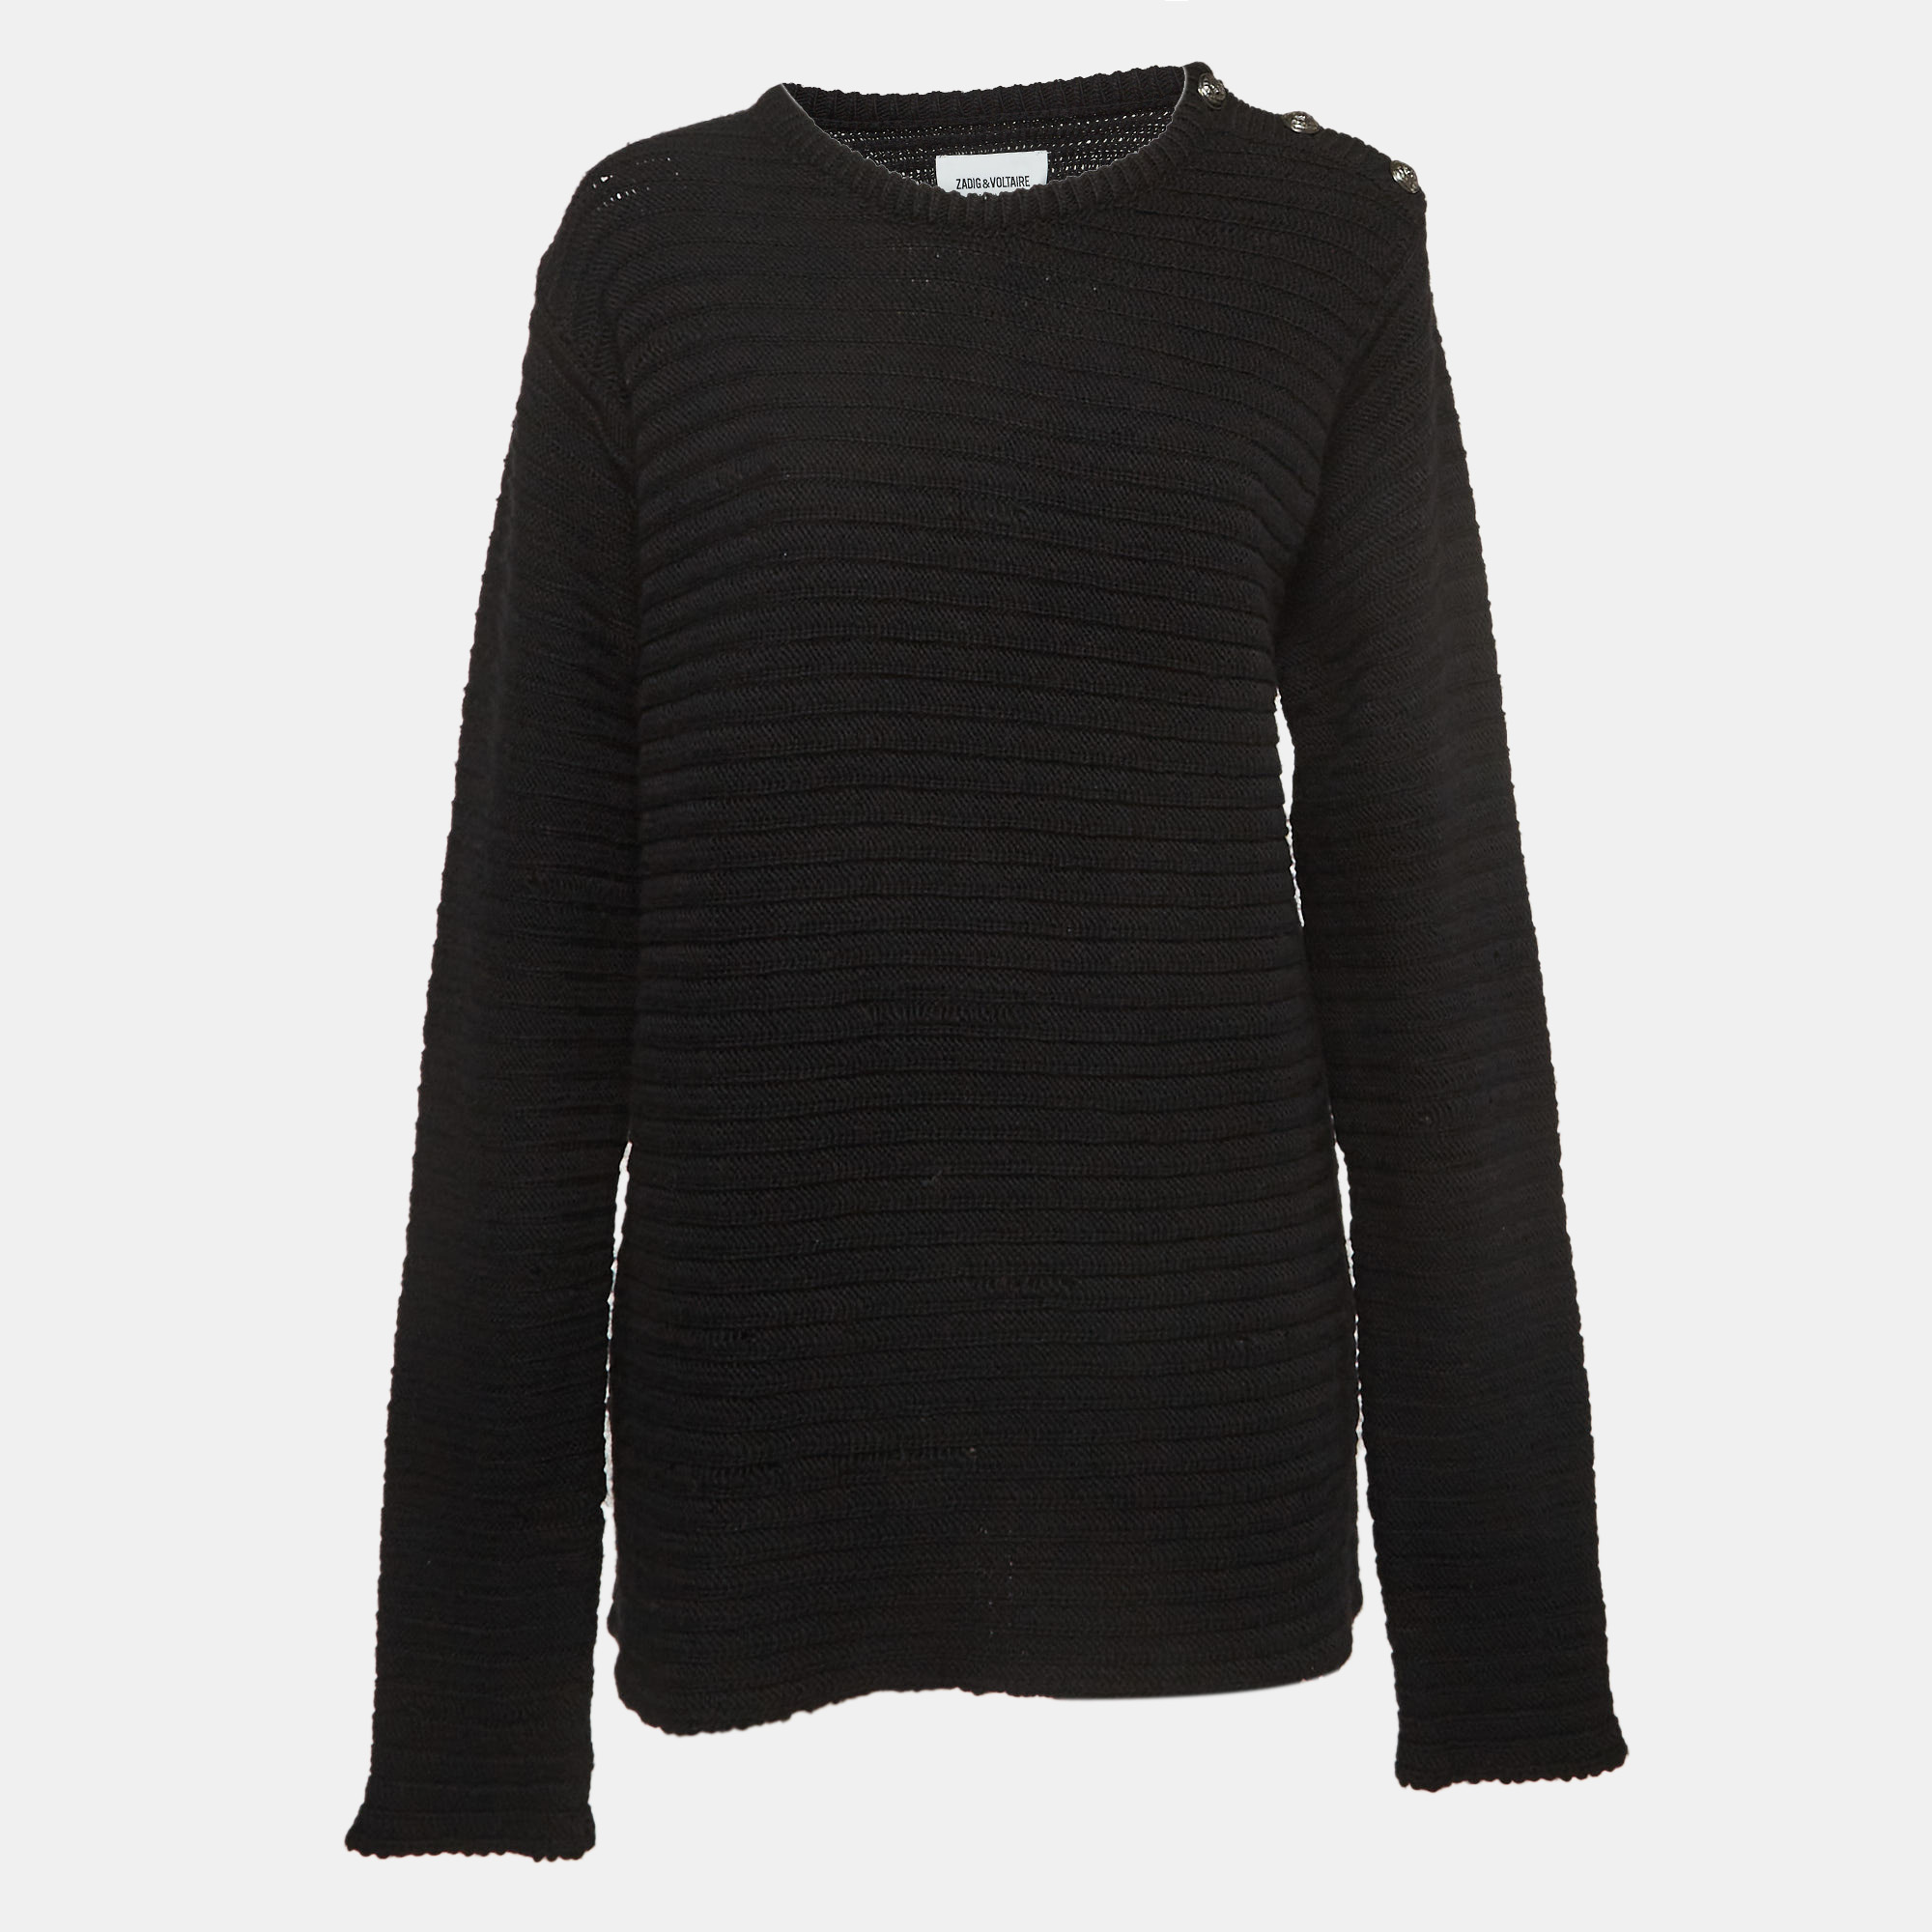 

Zadig & Voltaire Black Patterned Wool and Acrylic Sweater